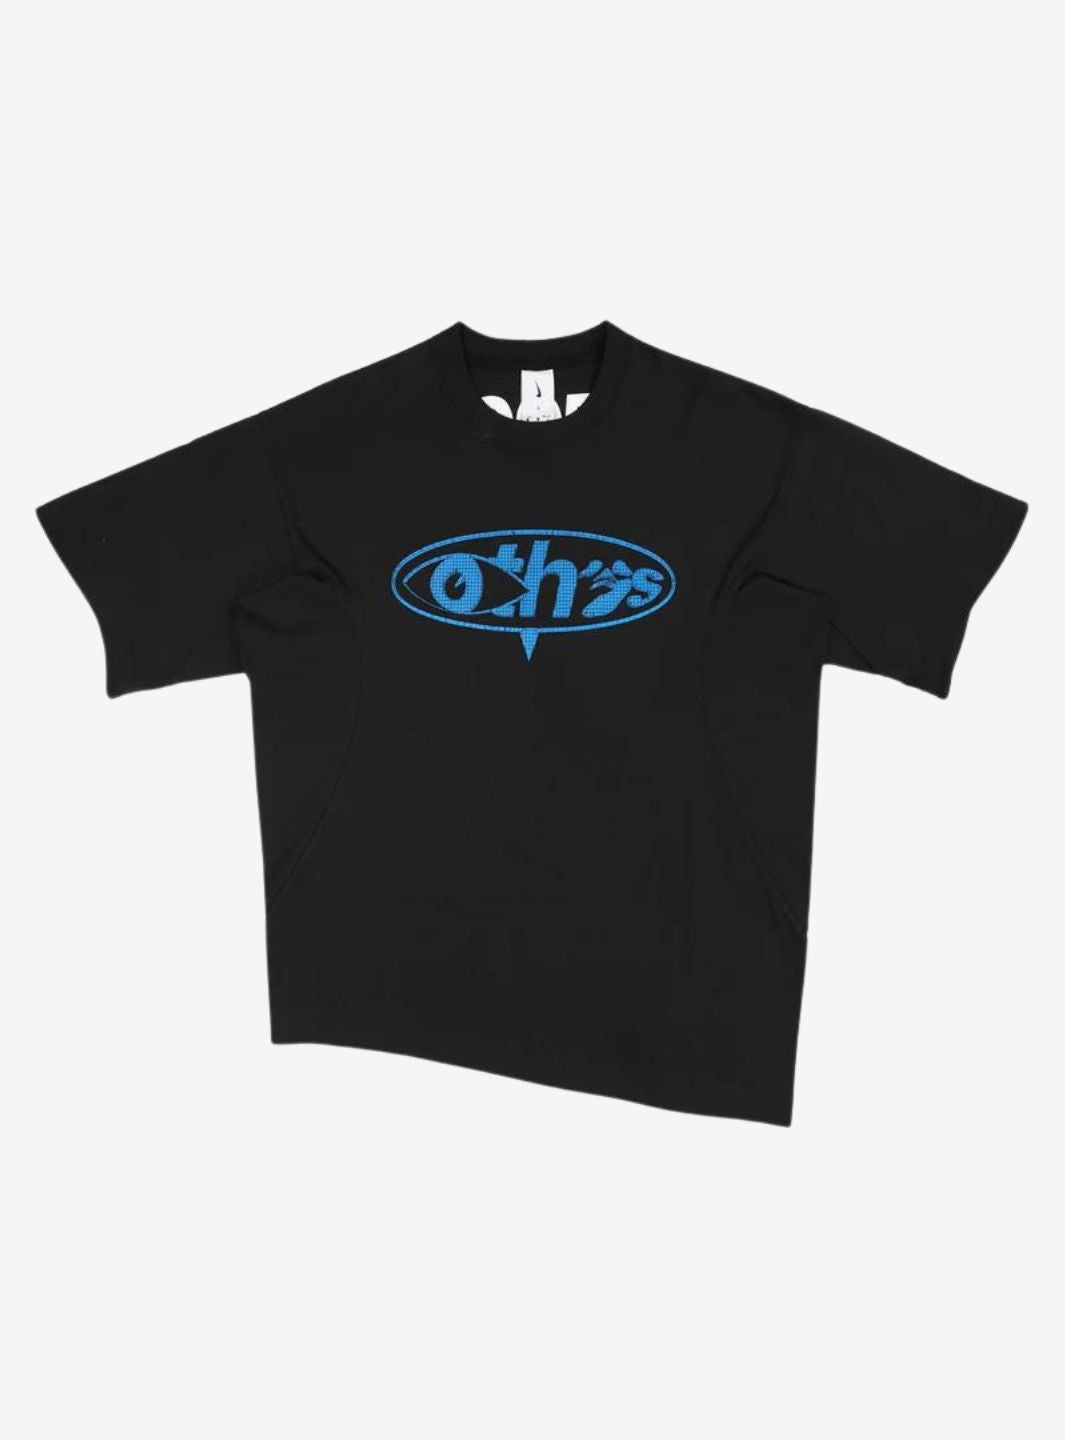 Off-White x Nike 005 T-Shirt Black - DN1757-010 | ResellZone